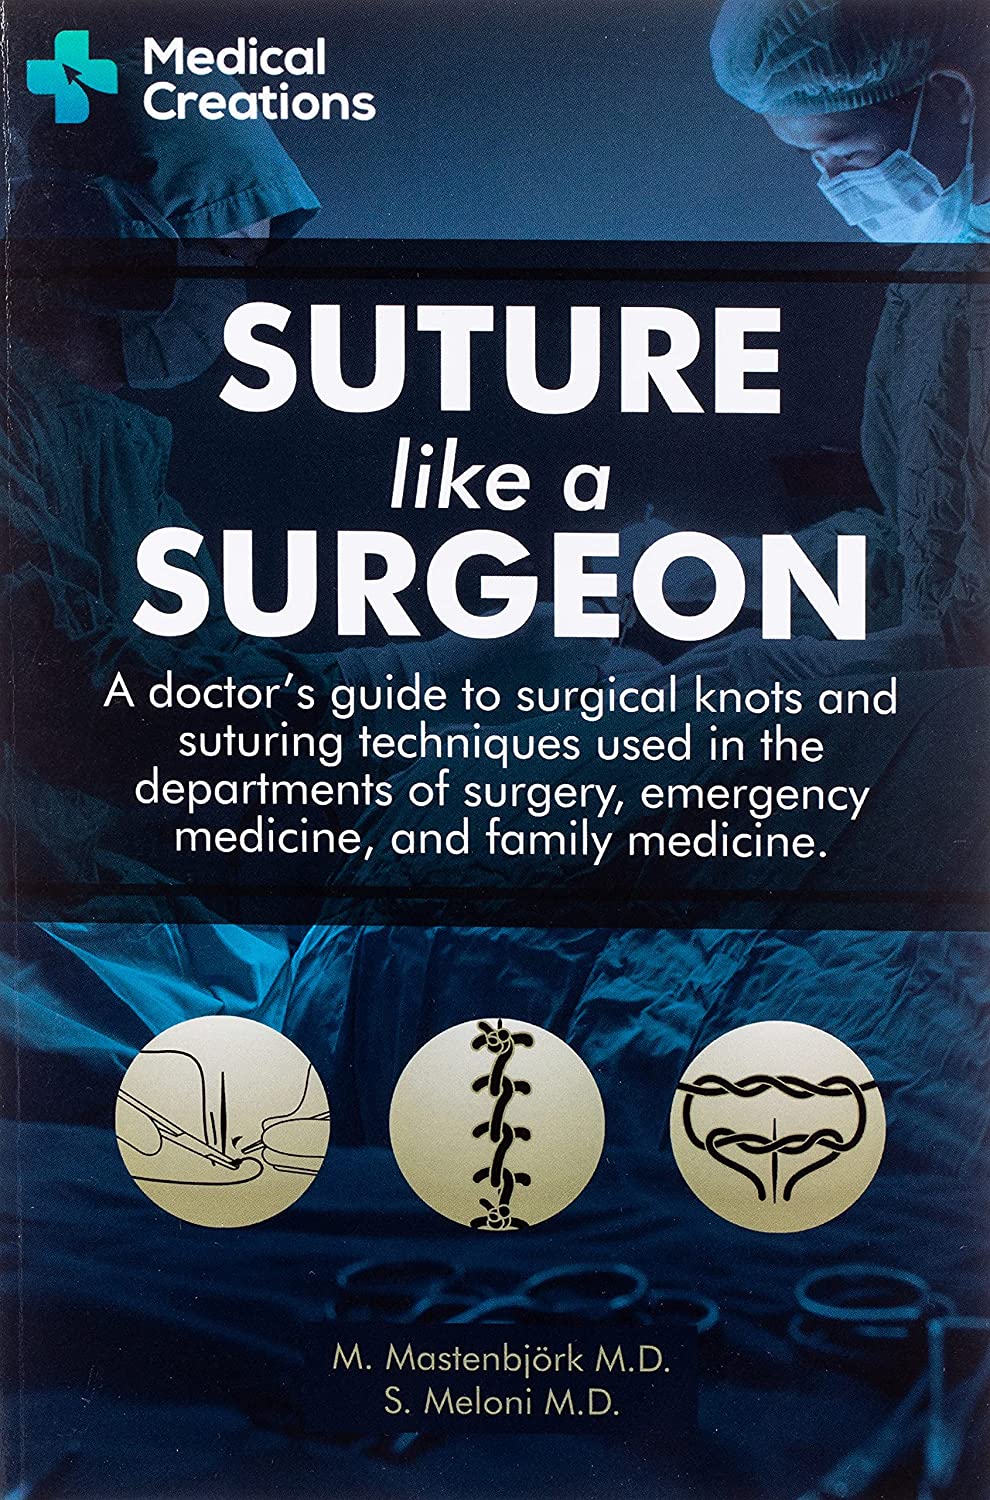 Suture like a Surgeon: A Doctor’s Guide to Surgical Knots and Suturing Techniques used in the Departments of Surgery, Emergency Medicine, and Family Medicine